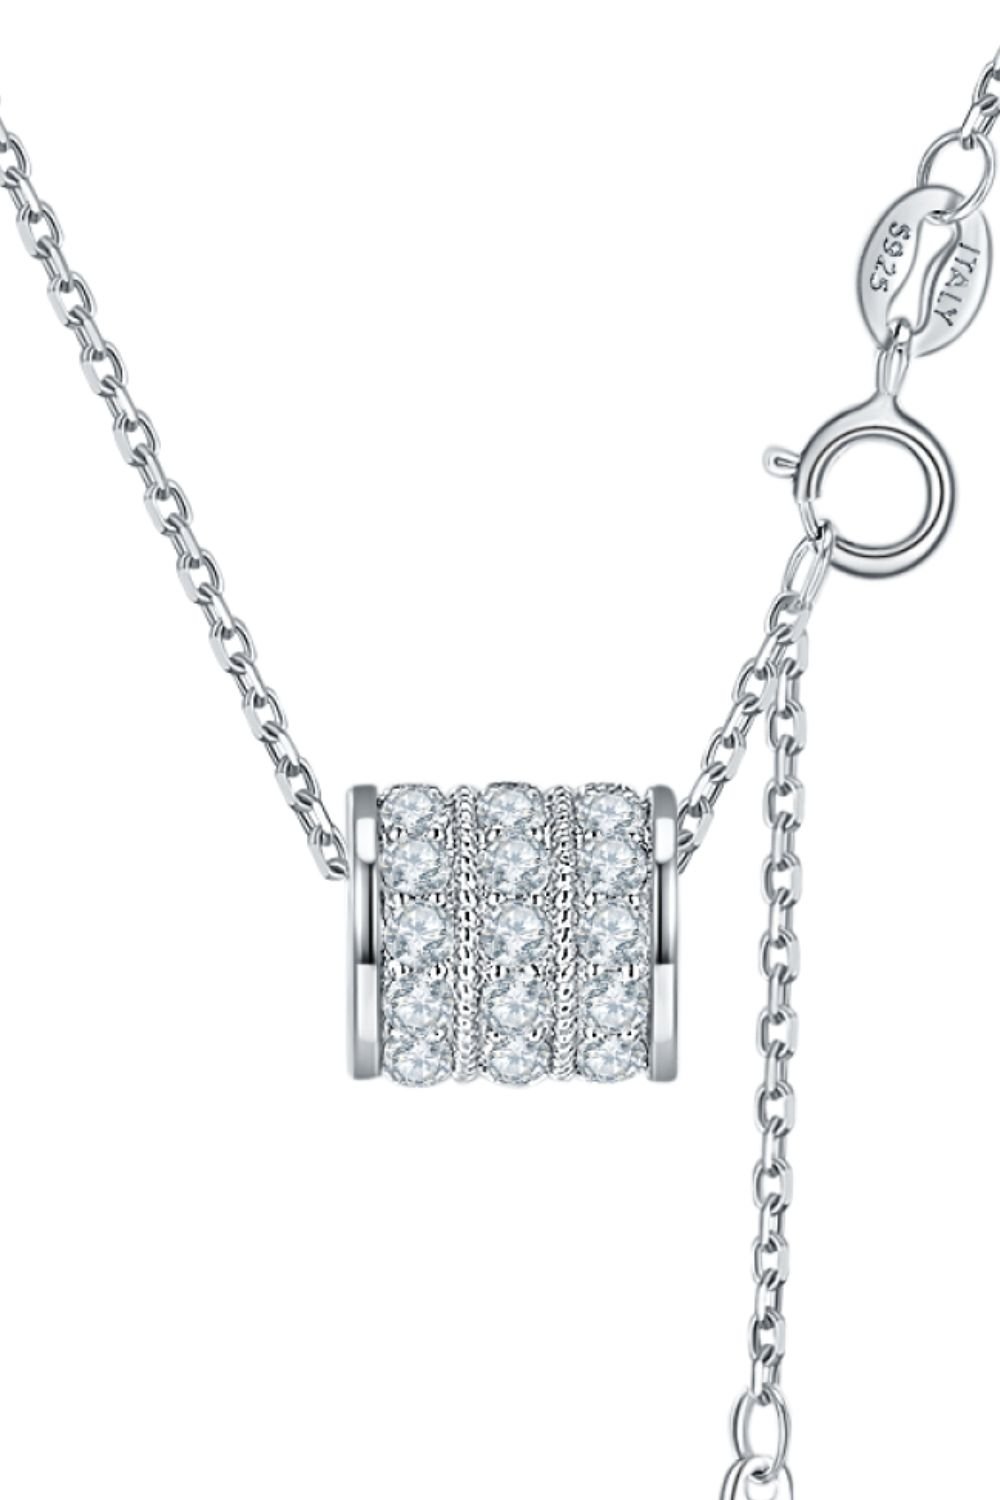 Moissanite 925 Sterling Silver Necklace - EMMY